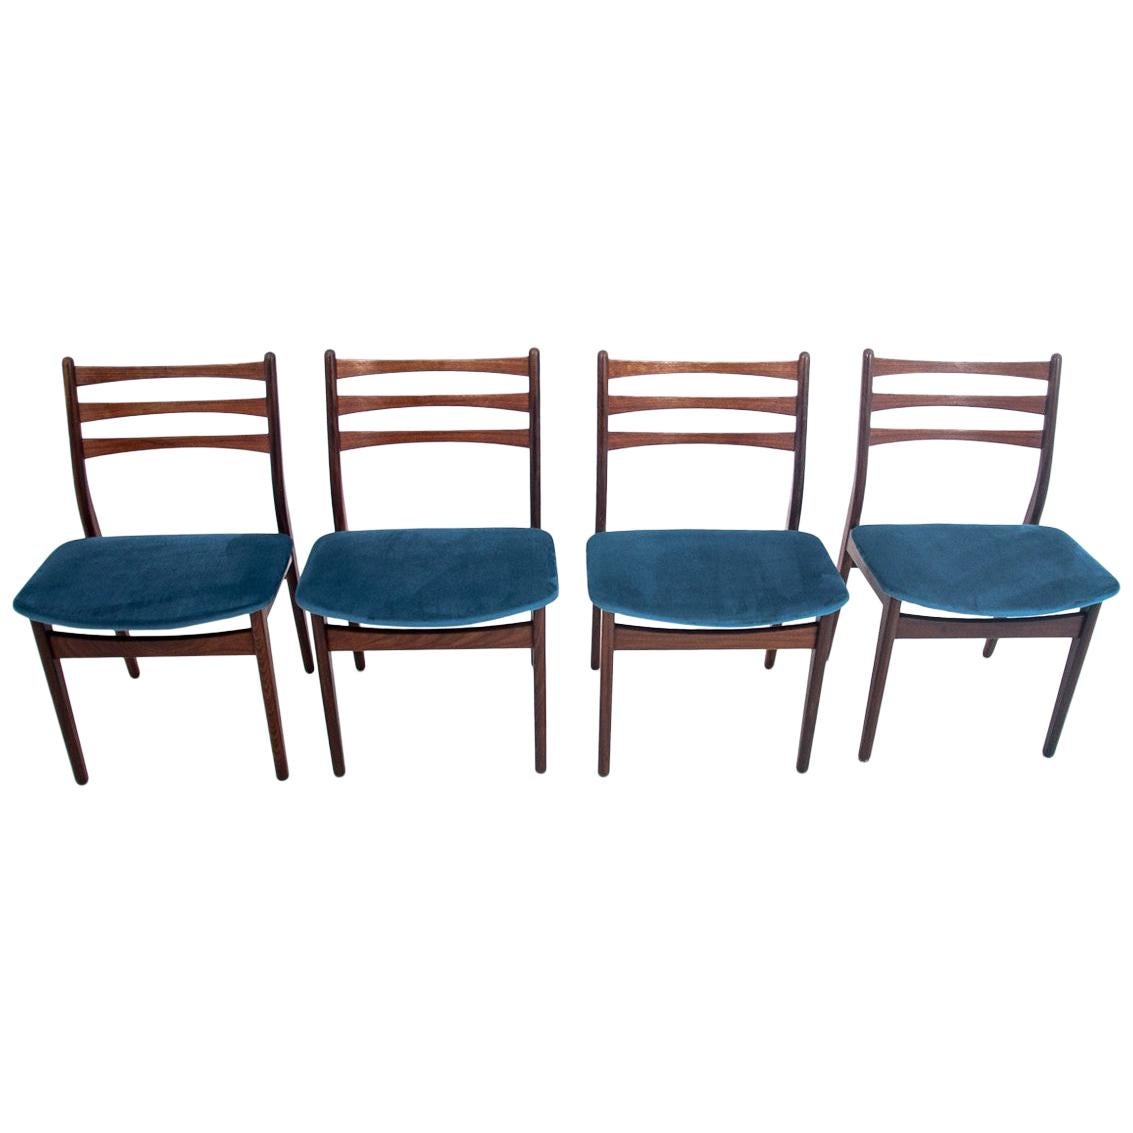 Four Danish Dining Chairs after Renovation with Ladder Back